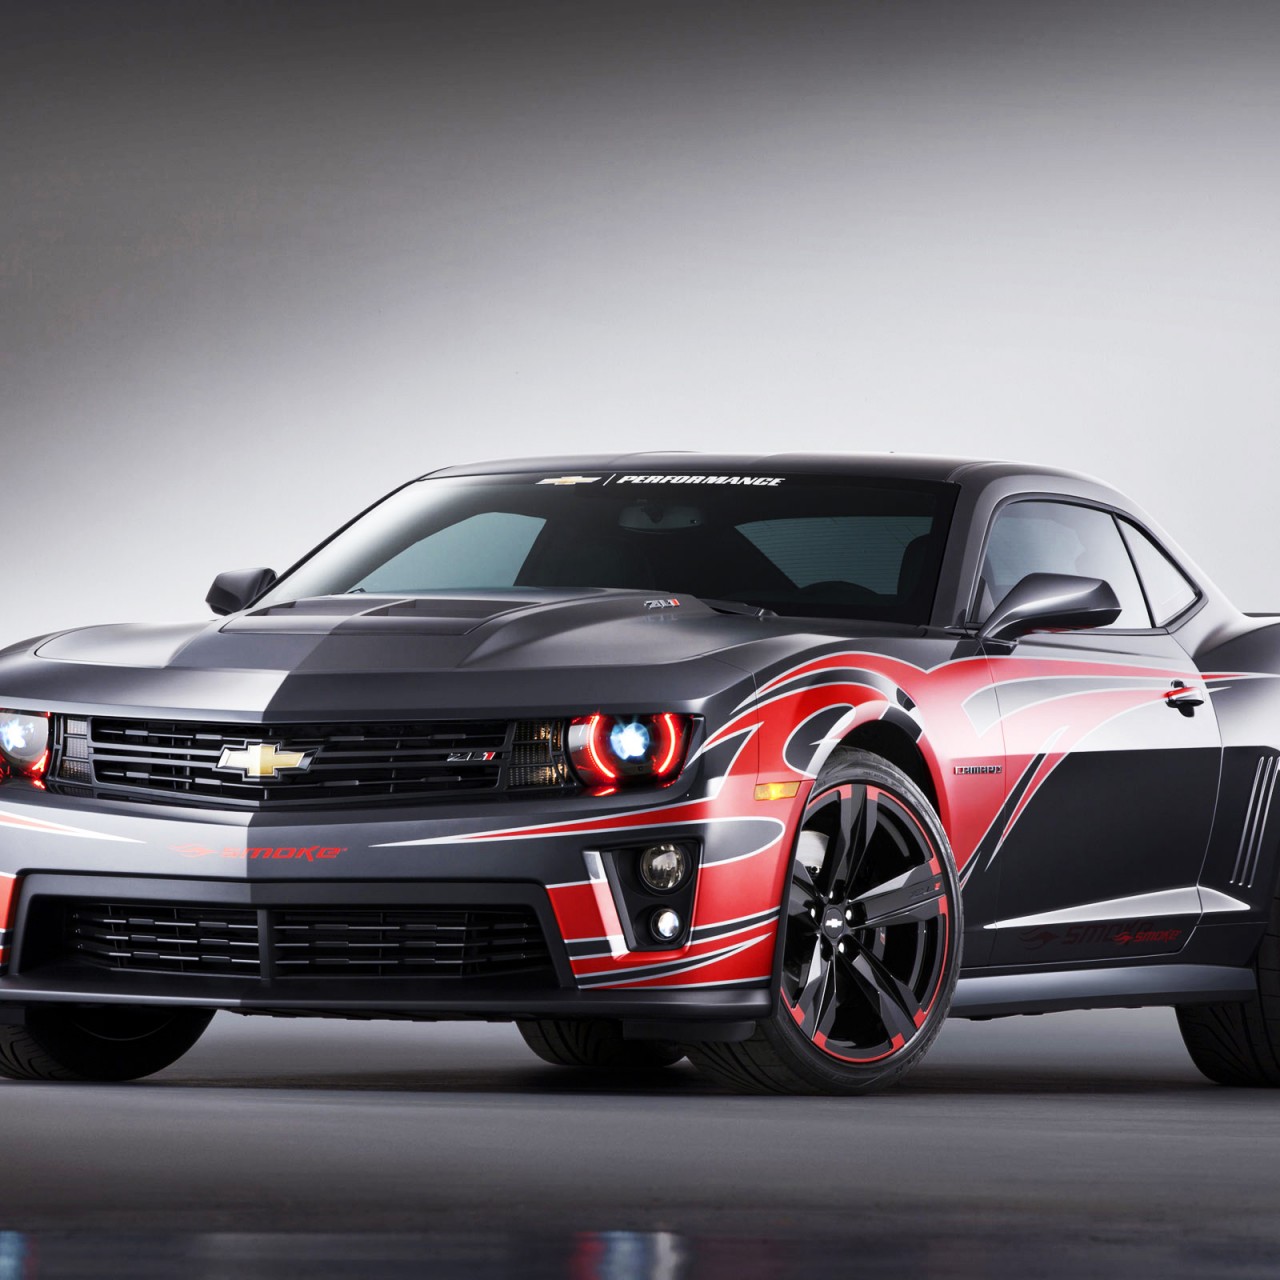 Chevy Muscle Car Wallpaper 6472 Hd Wallpapers in Cars   Imagescicom